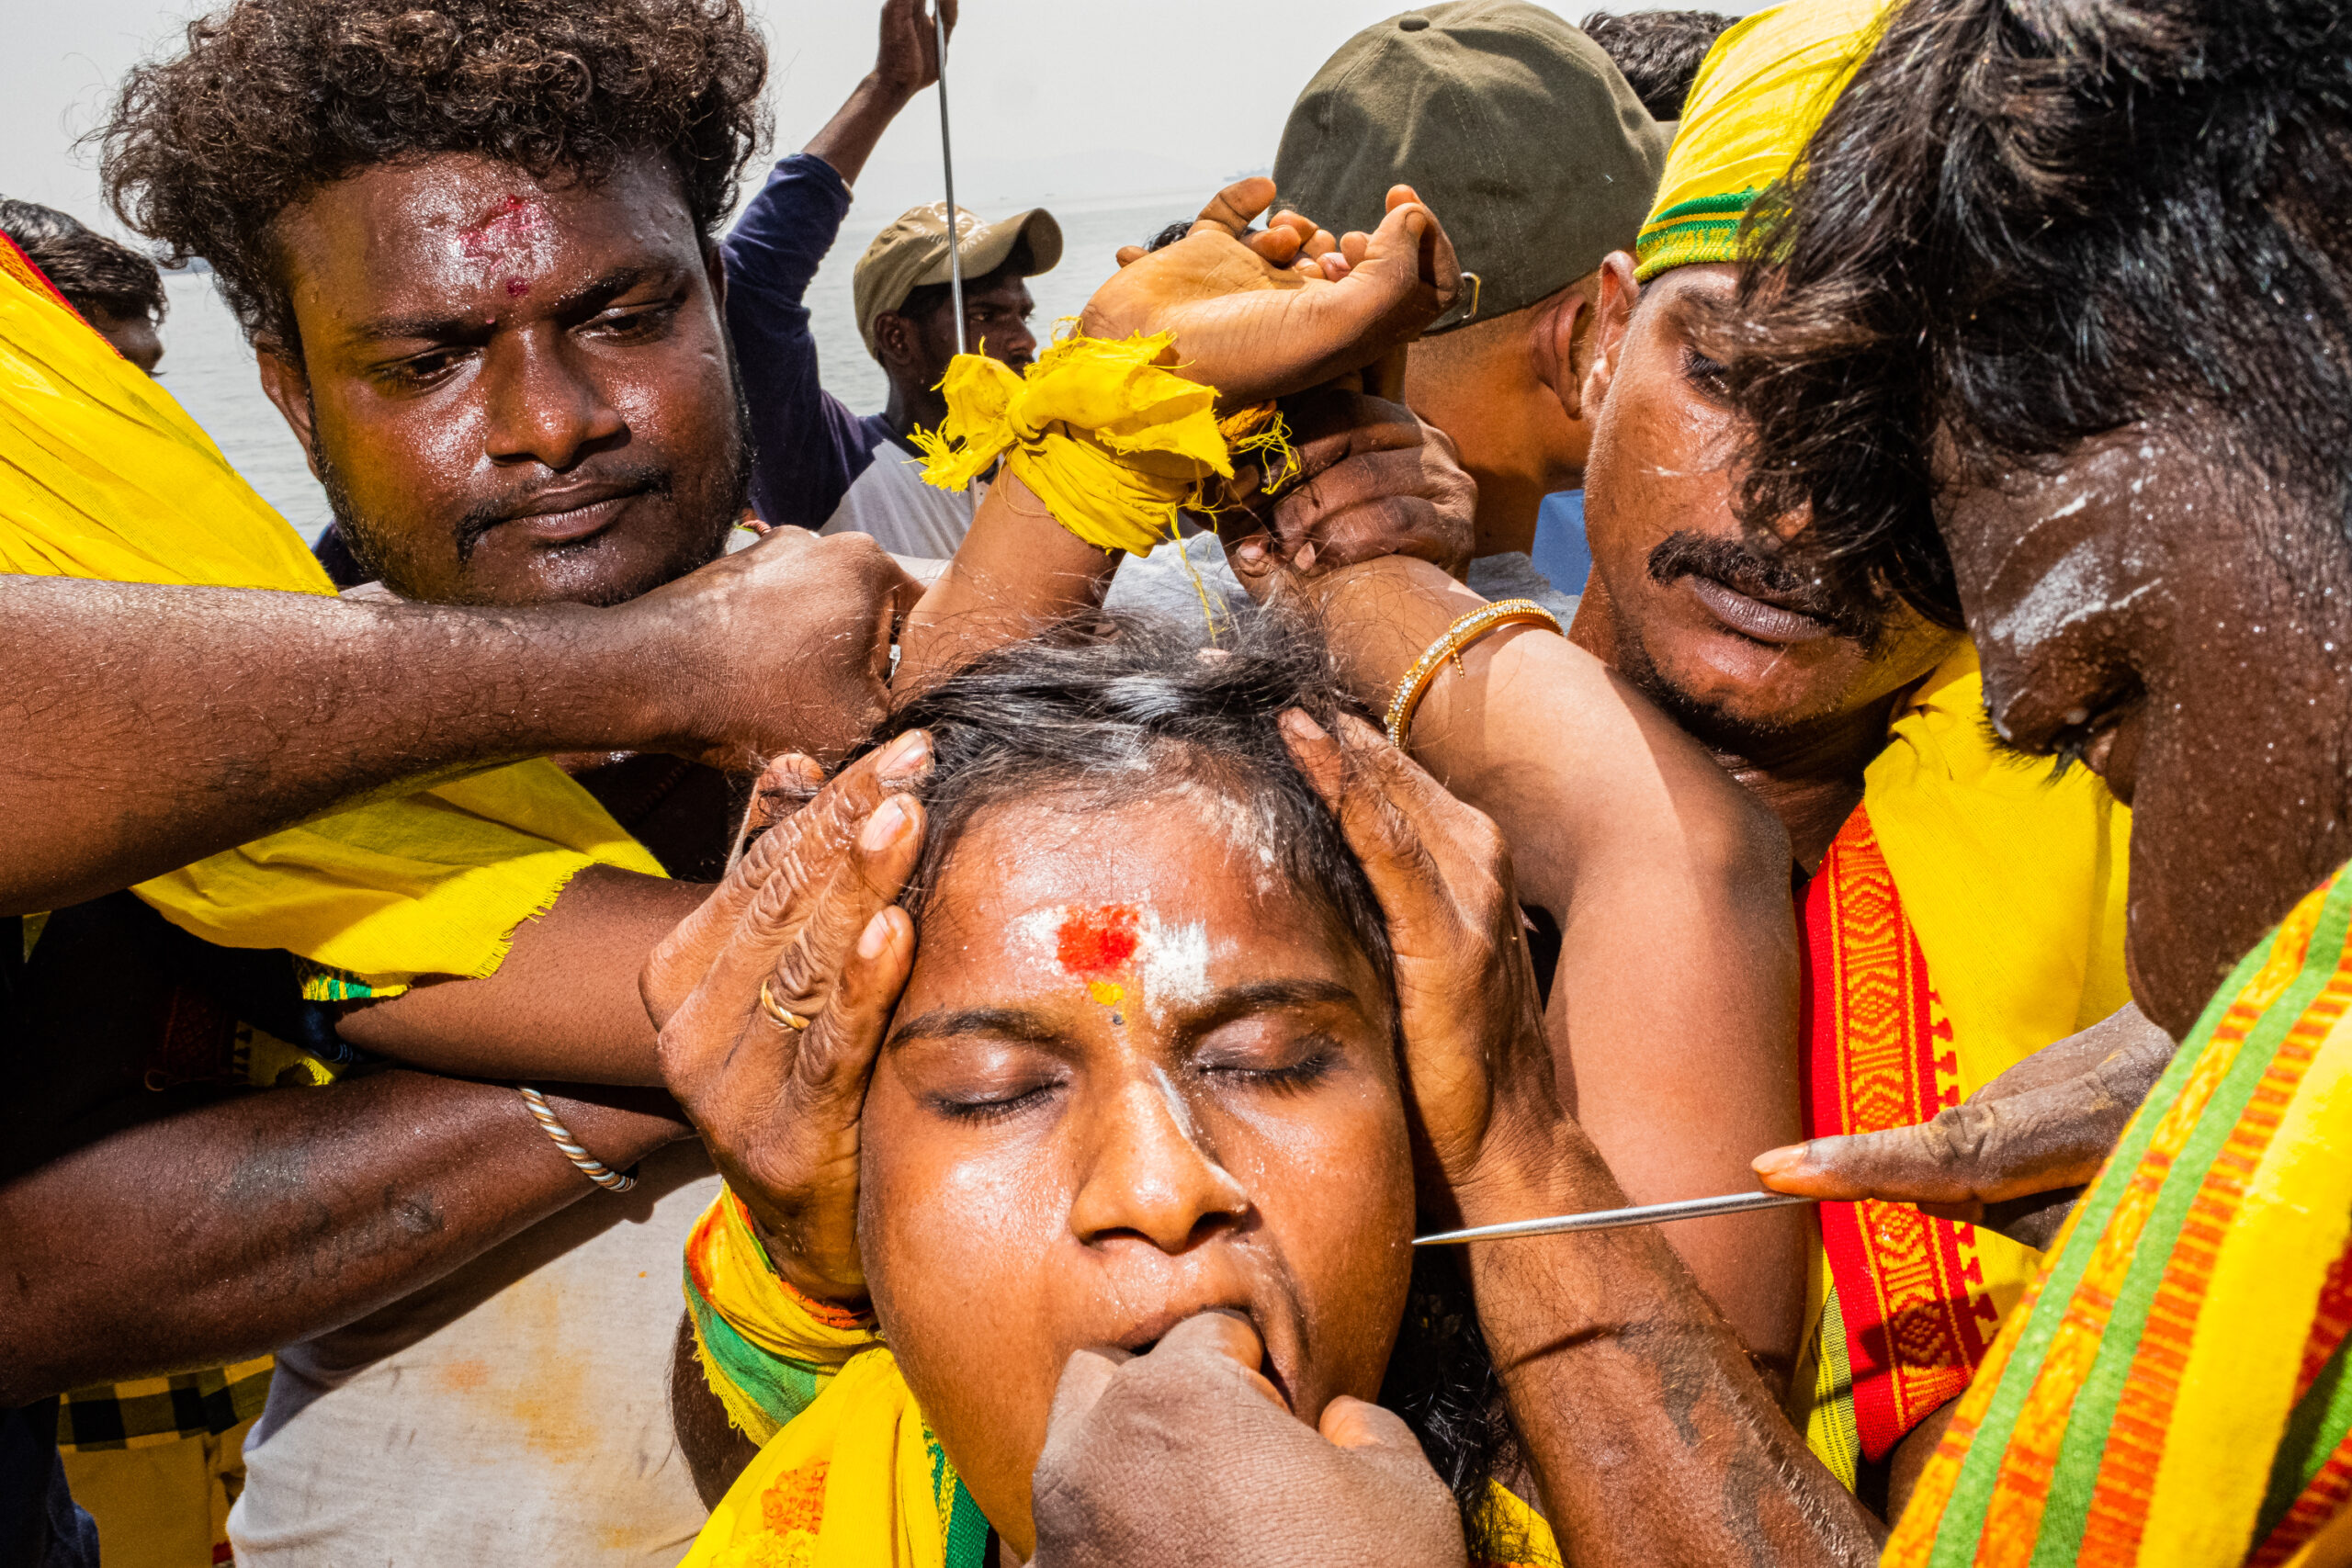 During Chitra Purnima, an important religious day for the Tamil community, several rituals take place. In one of them, devotees go into trance, channeling the Goddess in them, and have their cheeks pierced as a sign of devotion. This picture was taken in one of the small Tamil community pockets in the East coast of Mumbai.